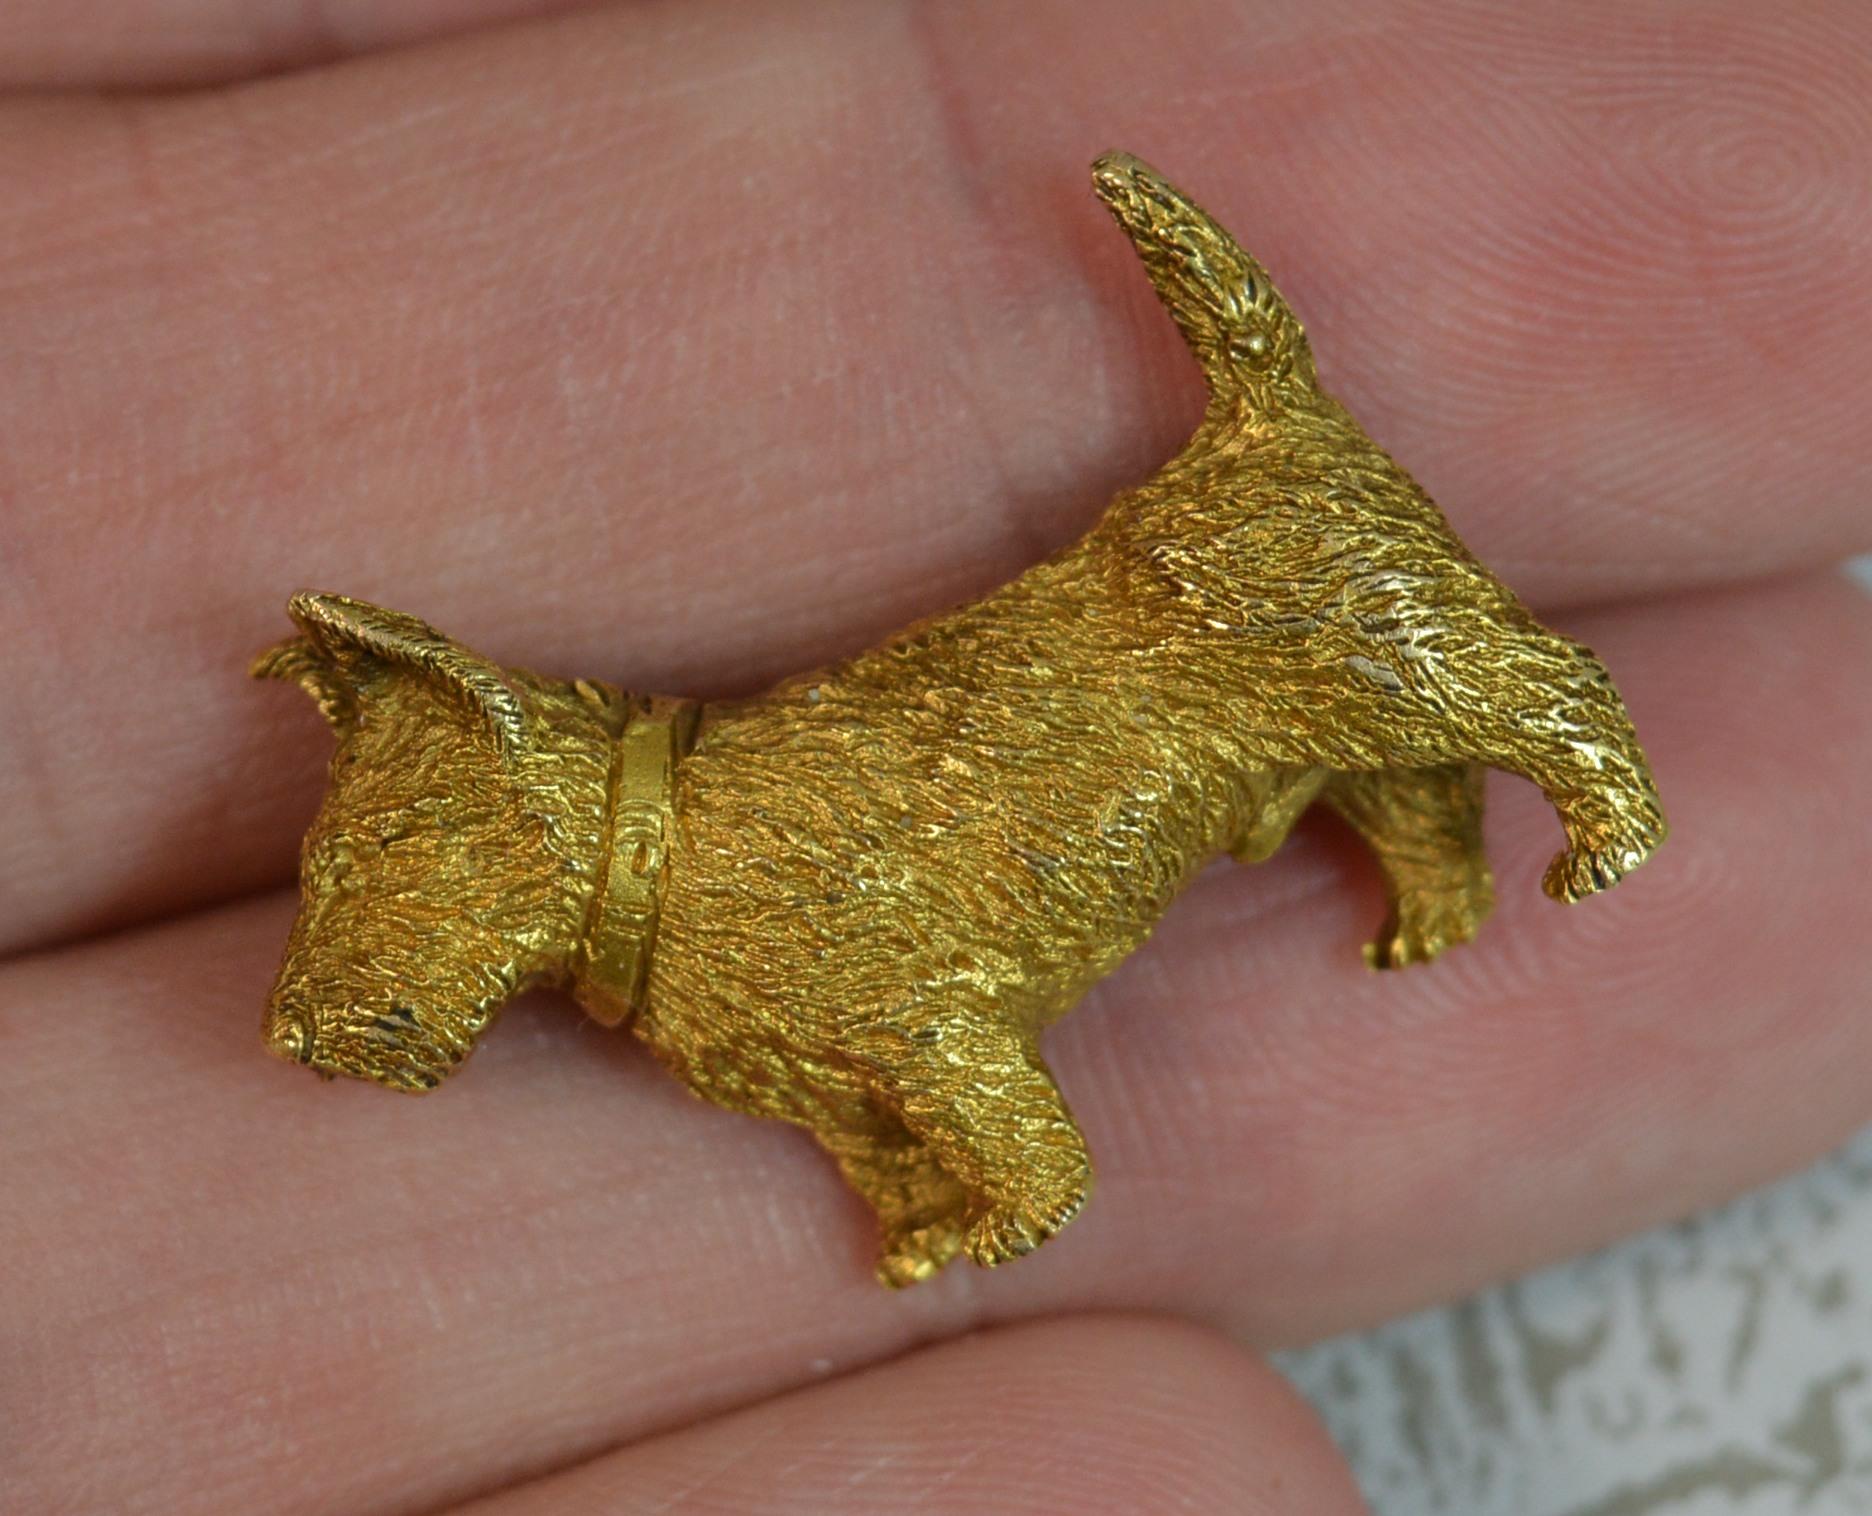 
A very fine late Victorian era brooch.
Solid 15 carat yellow gold example.
Very realistically formed as a Scottish (scottie) terrier dog.
Made by Alabaster and Wilson.

CONDITION ; Excellent. A very crisp example. Working pin and hinge. Please view